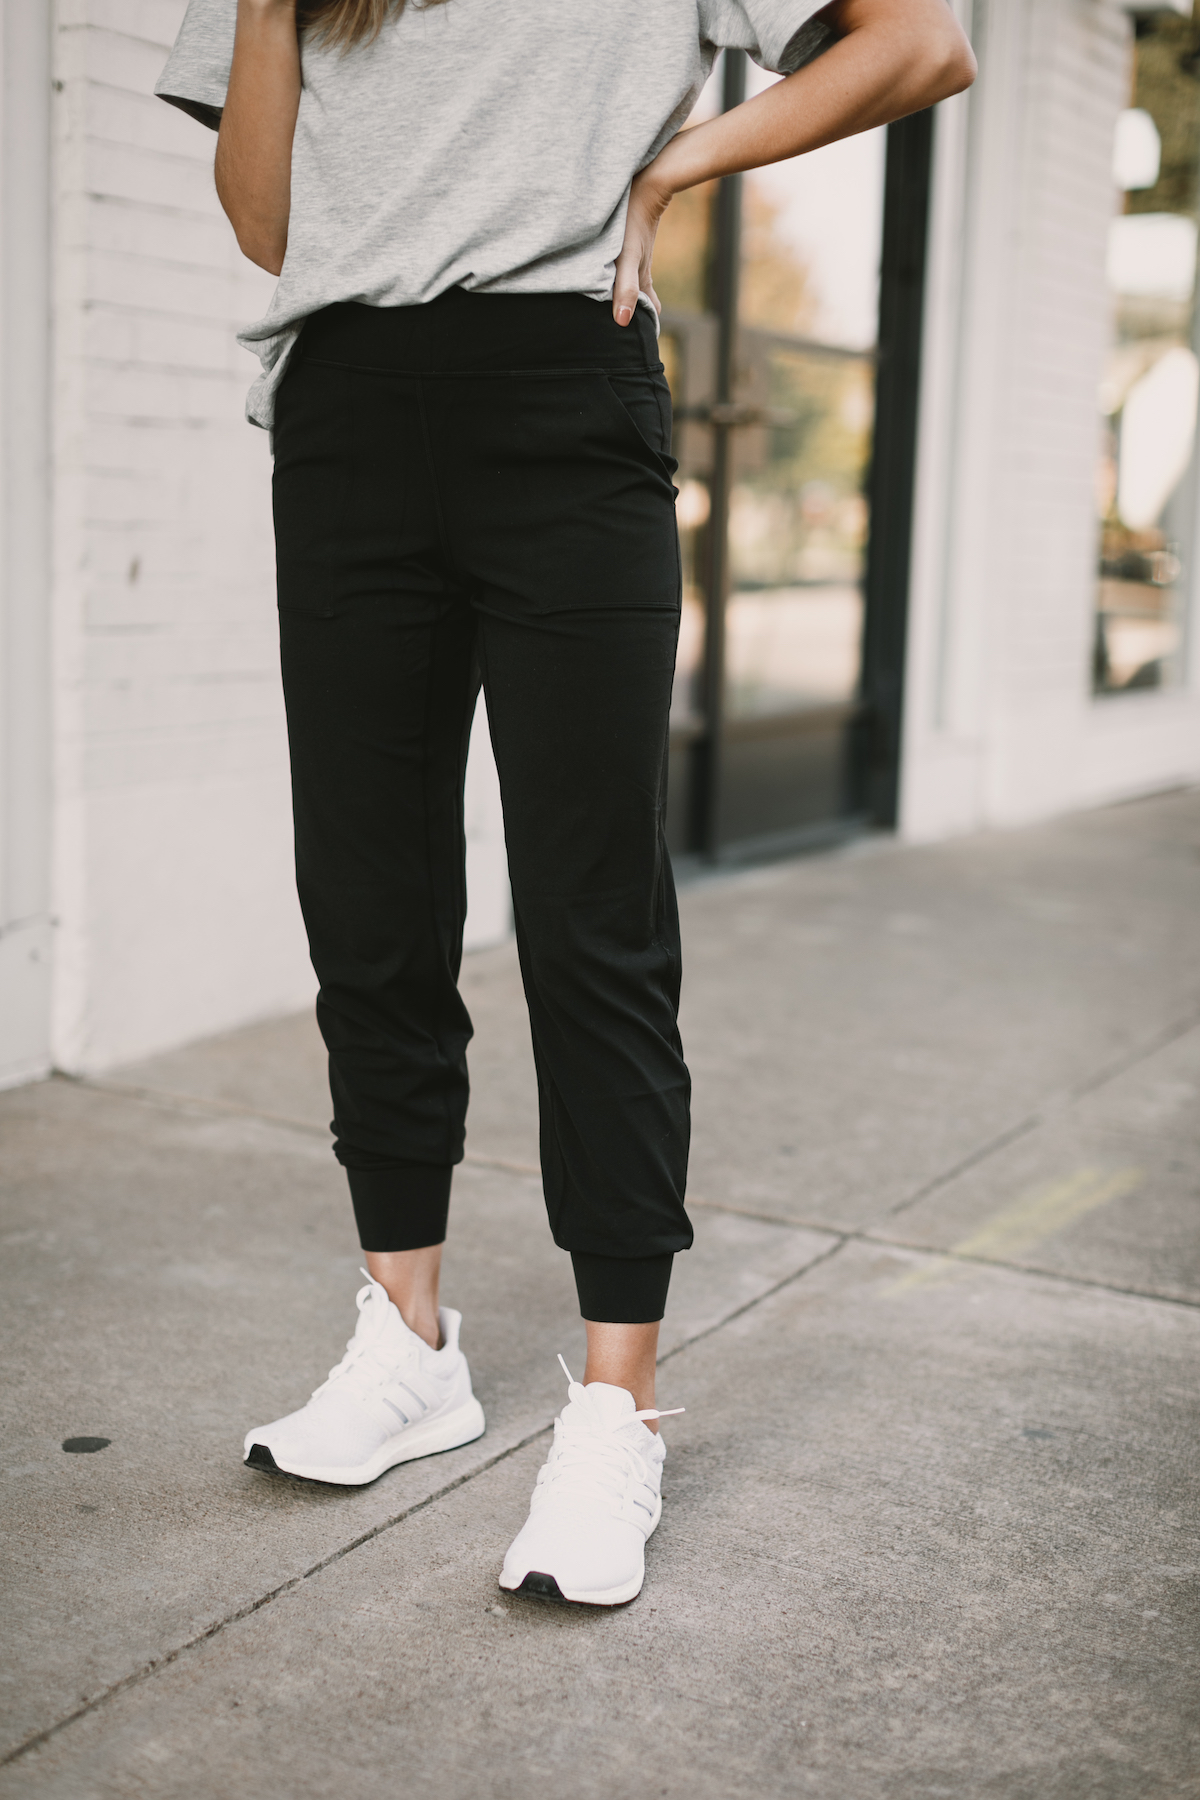 Kinda fell in love with these align joggers i tried on in-store?? : r/ lululemon